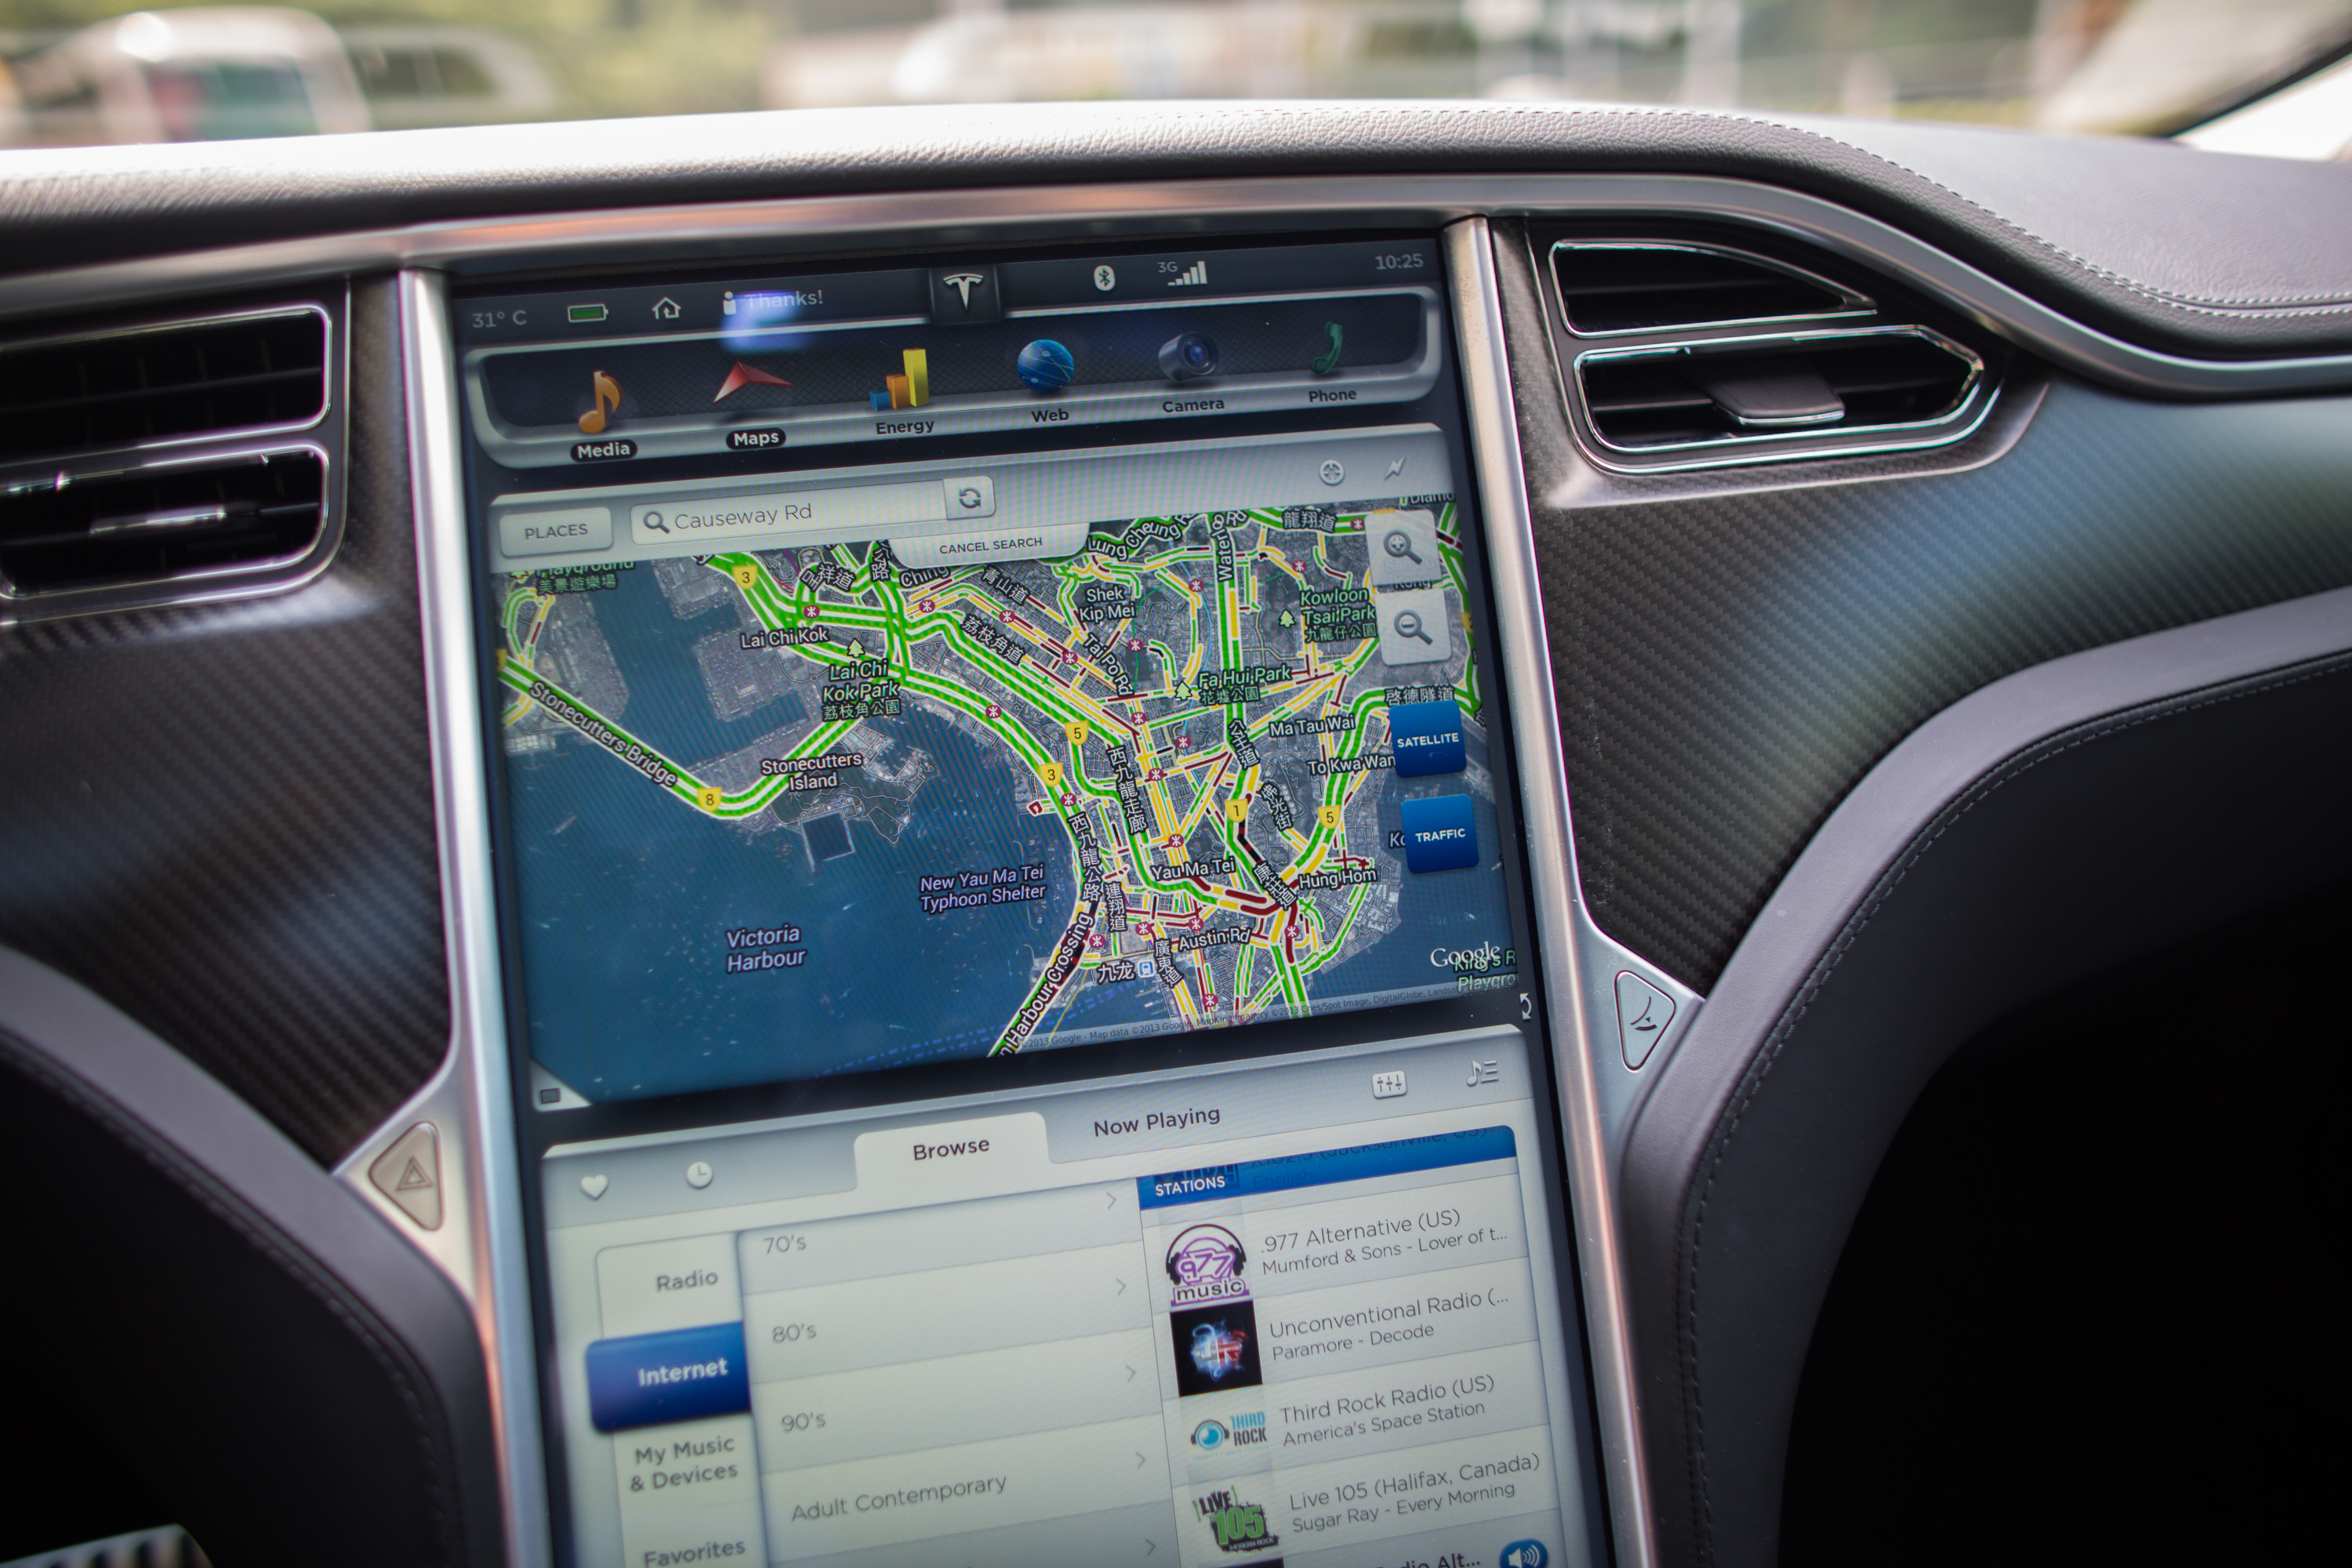 A Google Inc. map is displayed on a screen in a Tesla Motors Inc. Model S sedan electric vehicle (EV) parked in the area of Cyberport in Hong Kong, China, on Friday, July 5, 2013. (Bloomberg&mdash;Bloomberg via Getty Images)